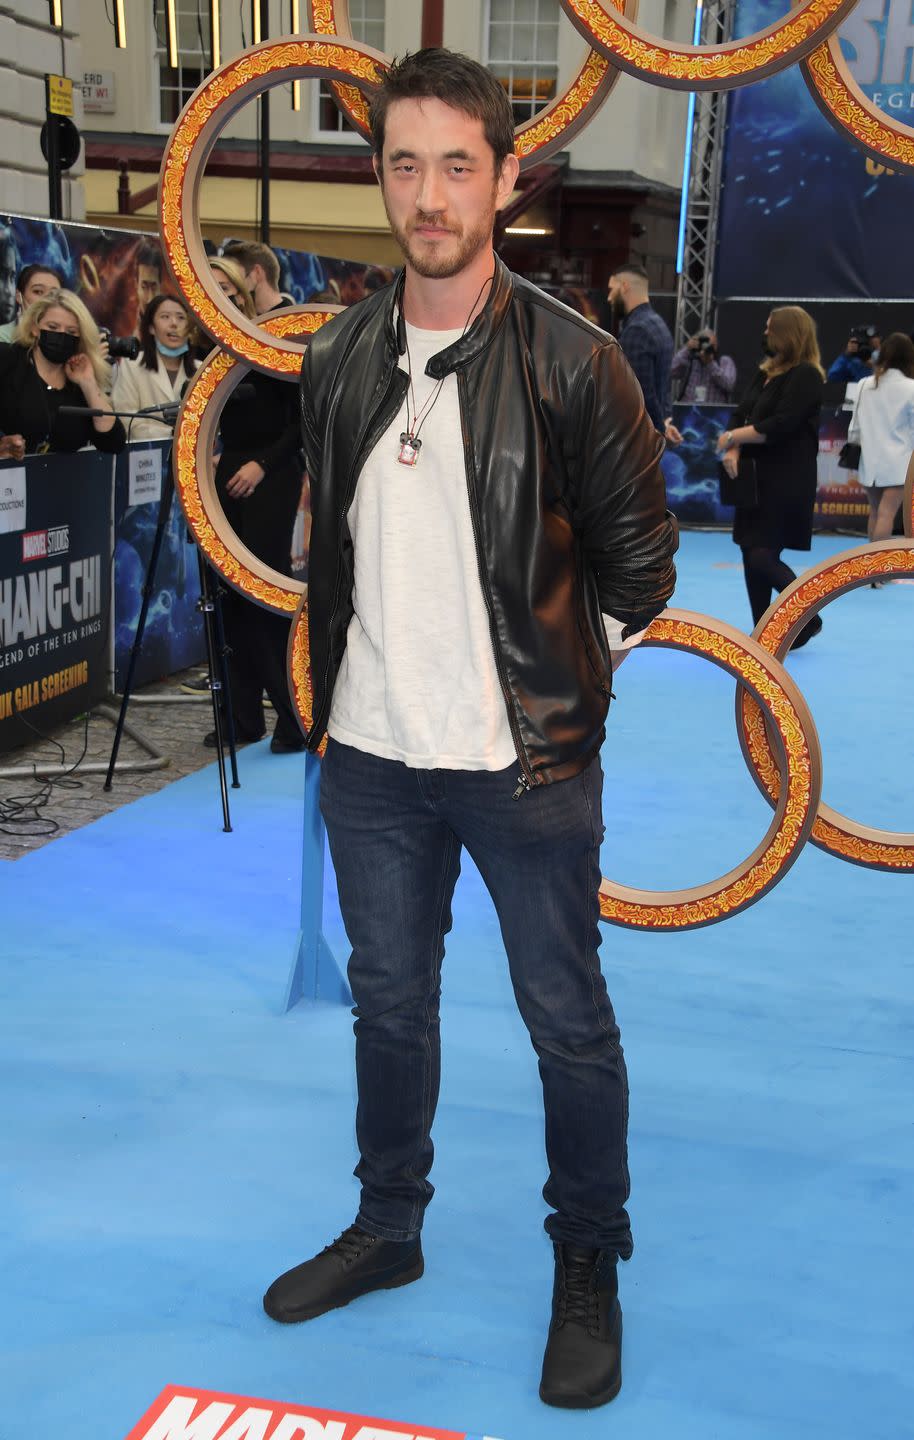 andrew koji, a man with dark hair and a beard wearing a white shirt and a black leather jacket, stands on a blue carpet in front of a sculpture of rings and smiles at the camera